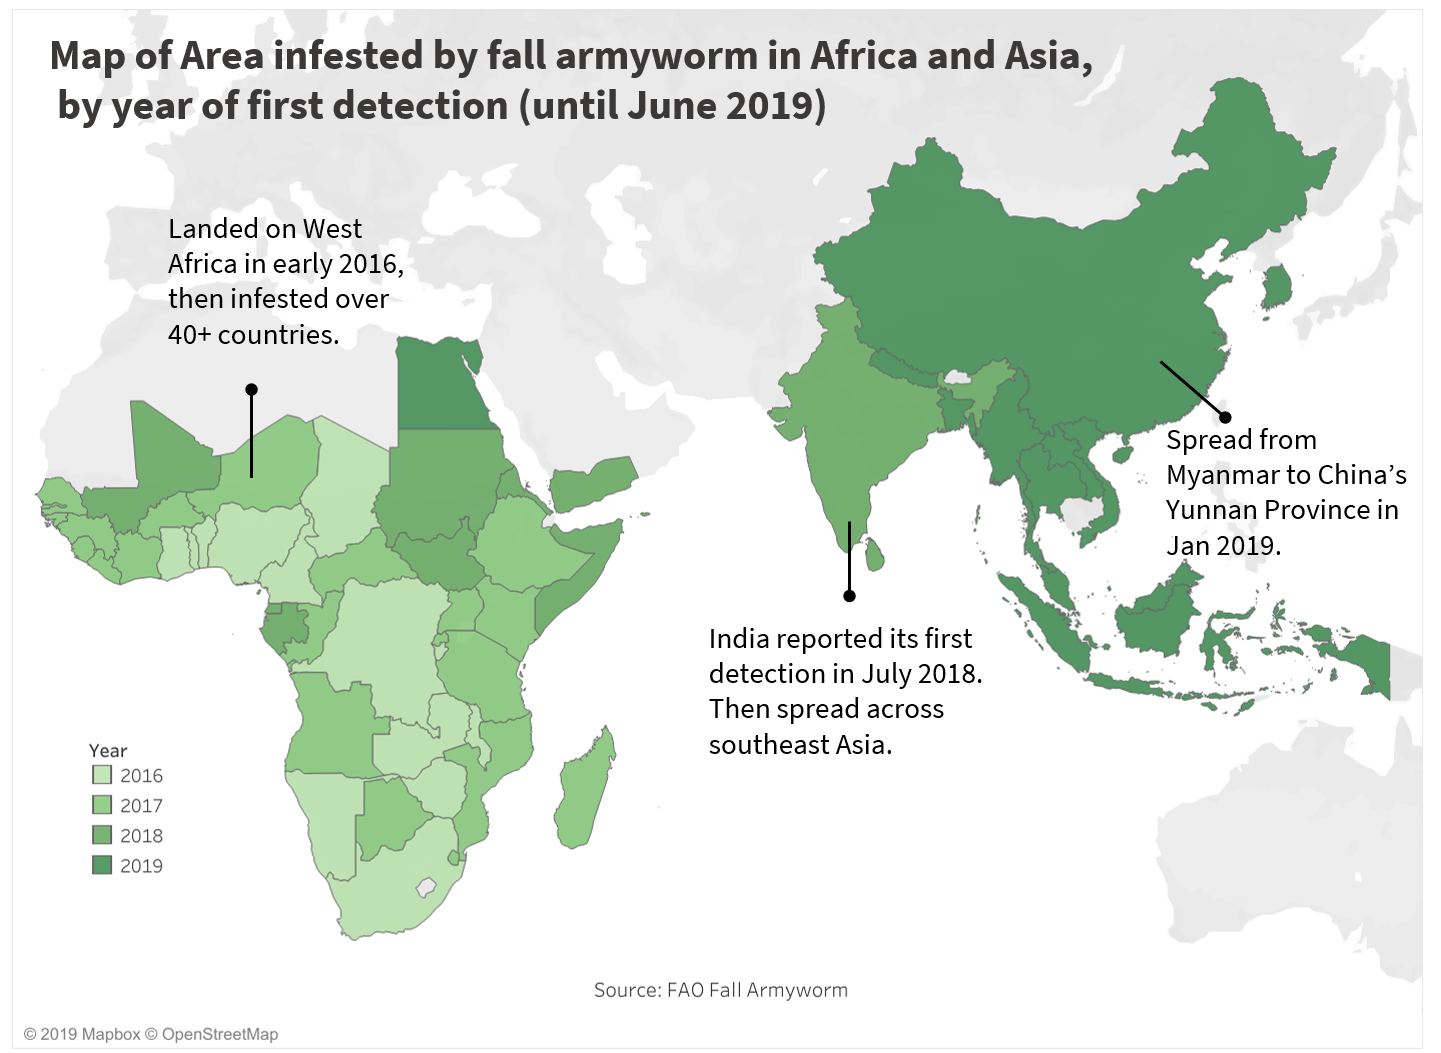 Maps of area infested with fall armyworm in Africa and Asia